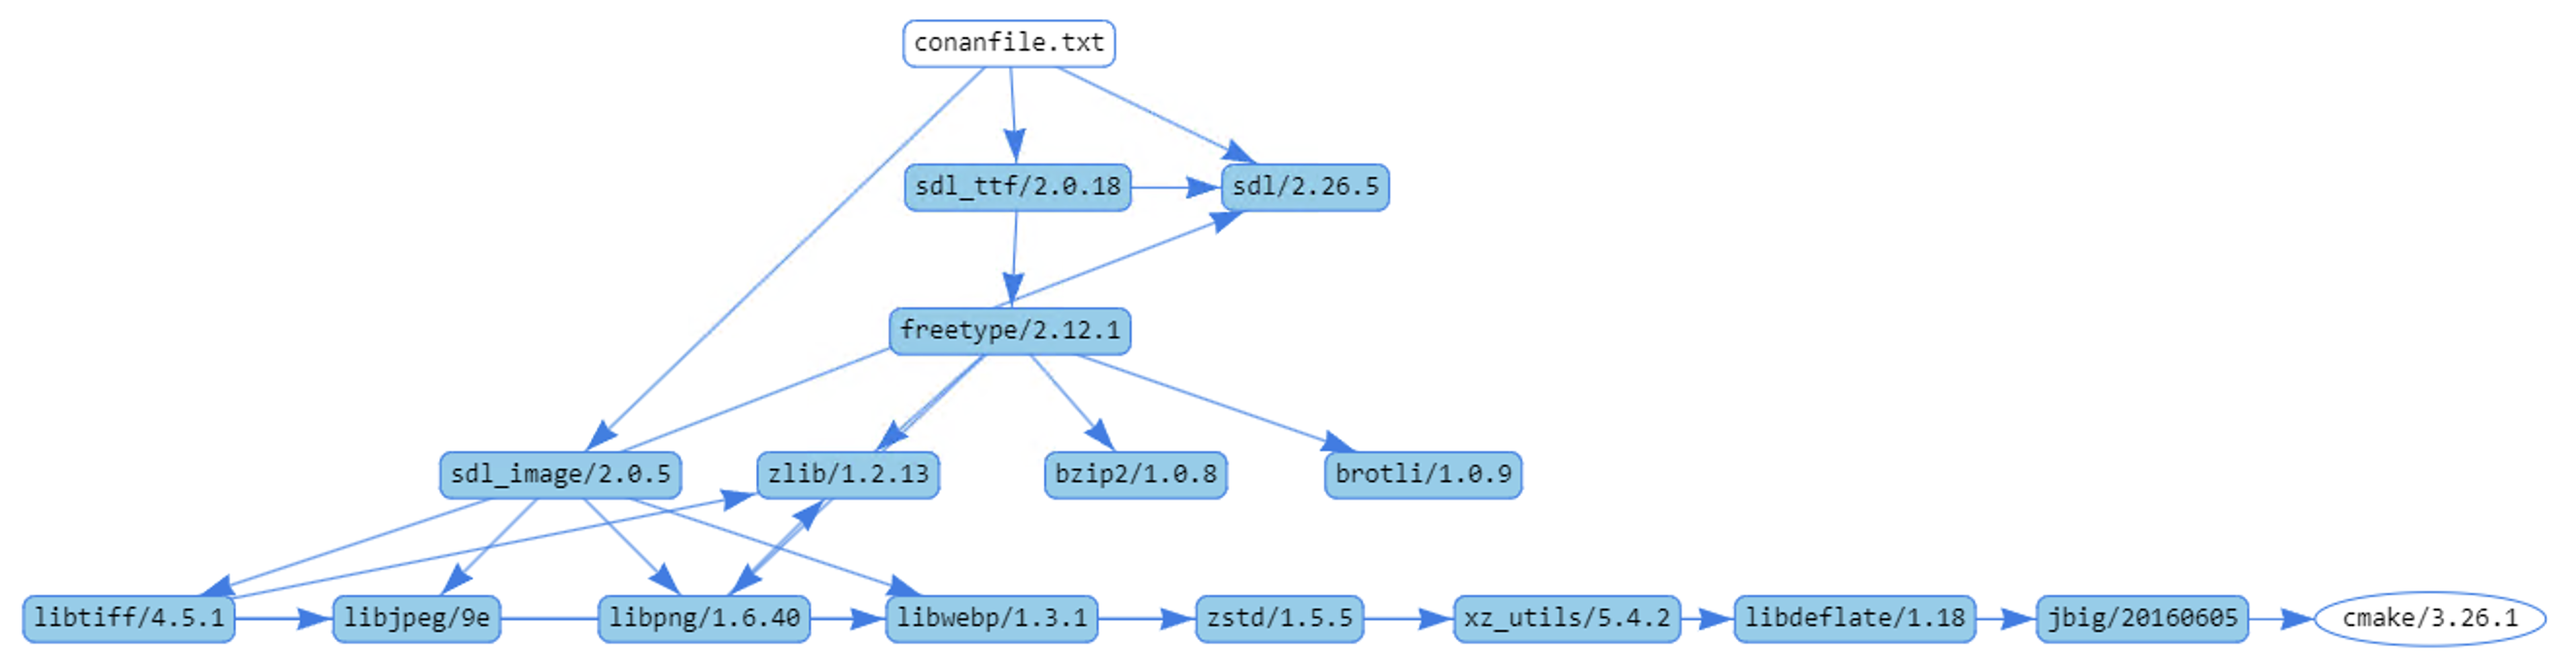 conan graph info HTML formatted view of the SDL2 dependencies